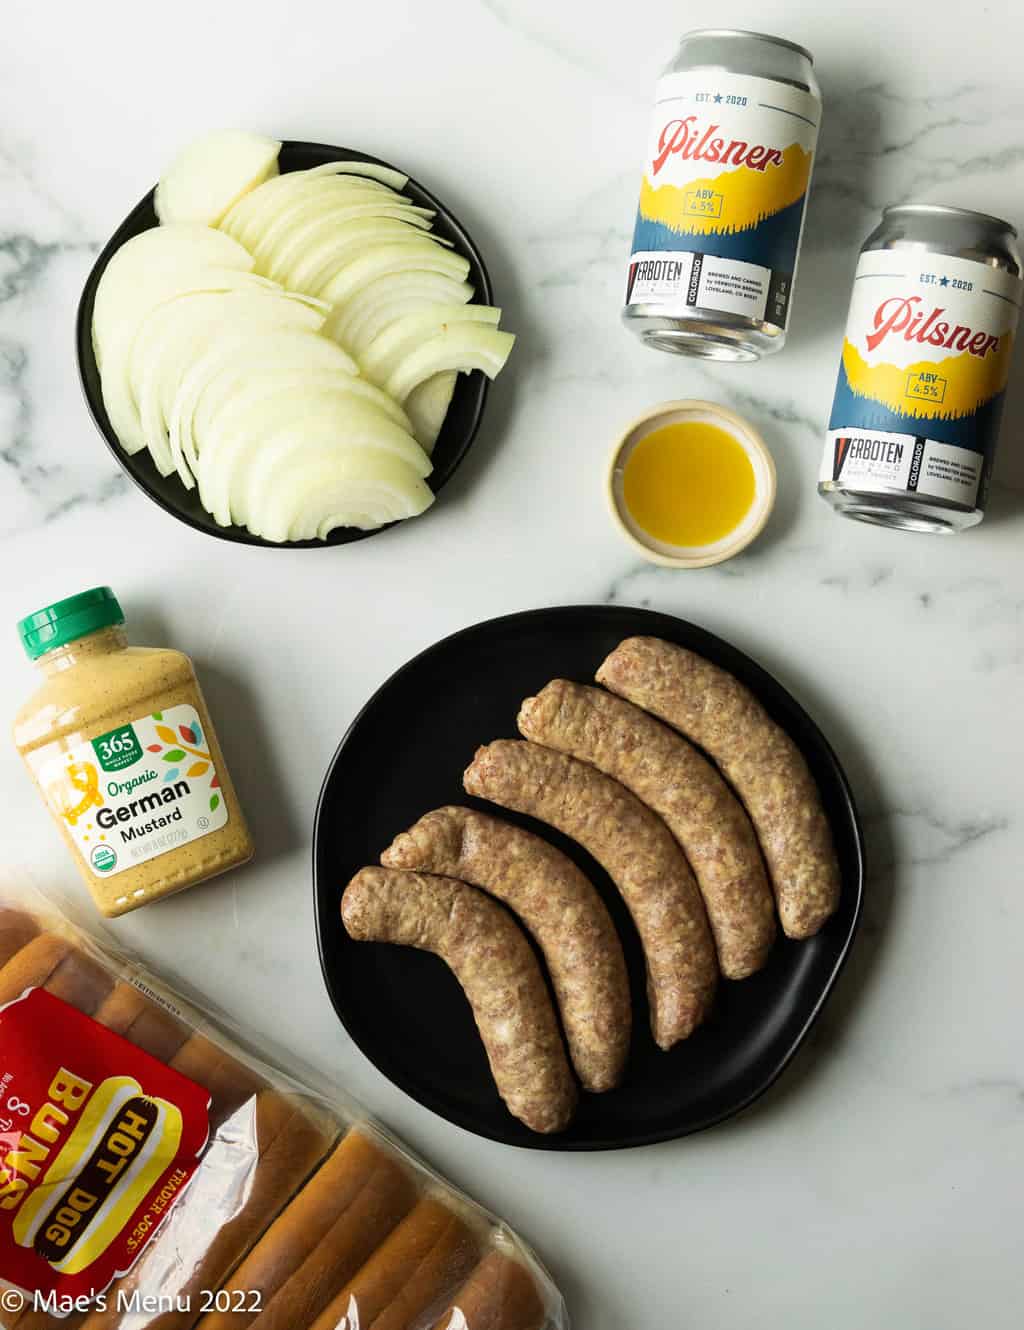 All of the ingredients for air fryer brats: beer, olive oil, onions, mustard, brats, and hot dog buns.